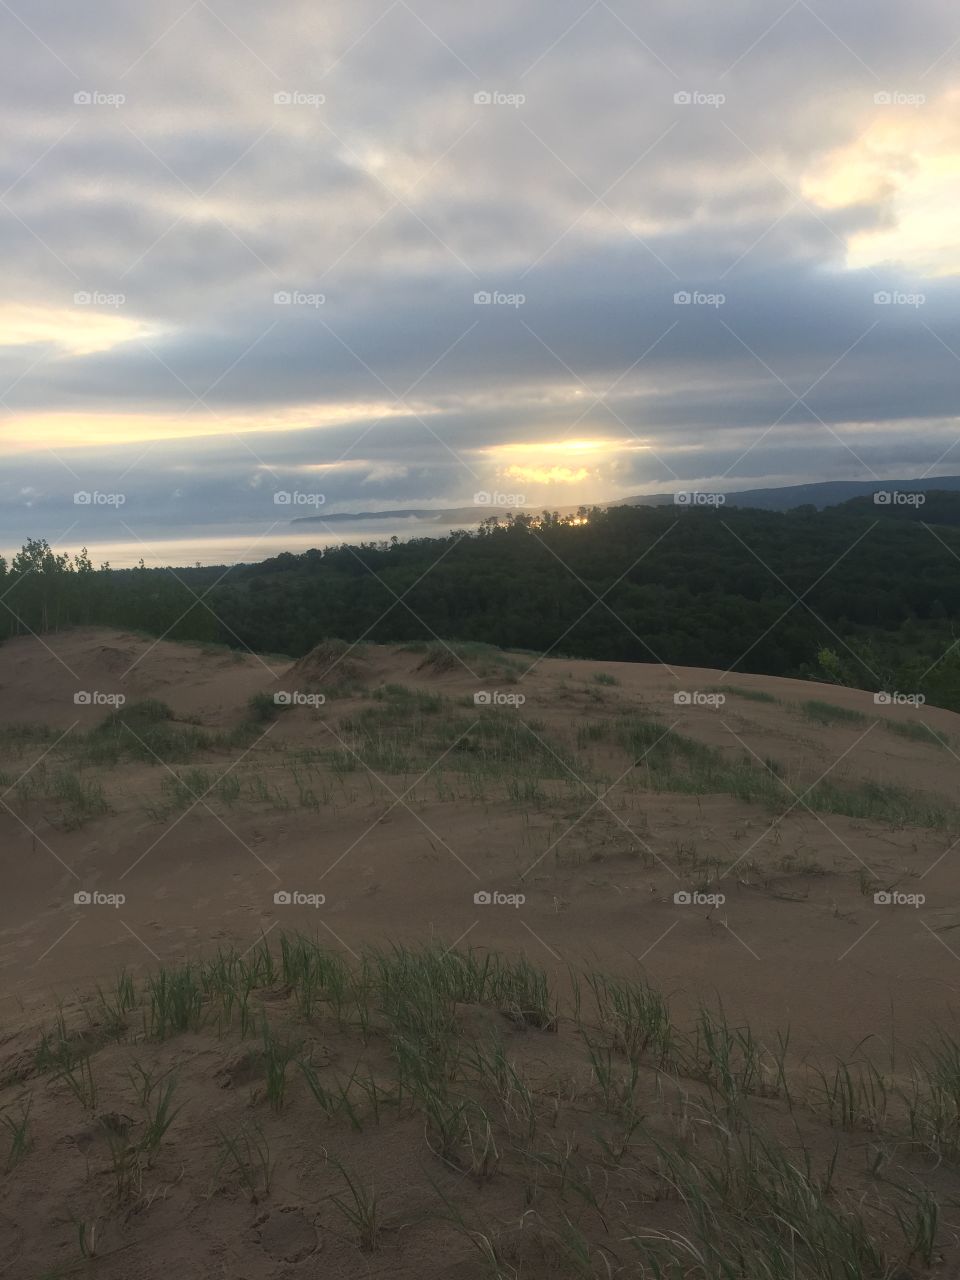 My Boy Scout troop hiked to the top of the sand dunes at Sleeping Bear Dunes National Lakeshore and watched the sunrise, it was a gorgeous experience!